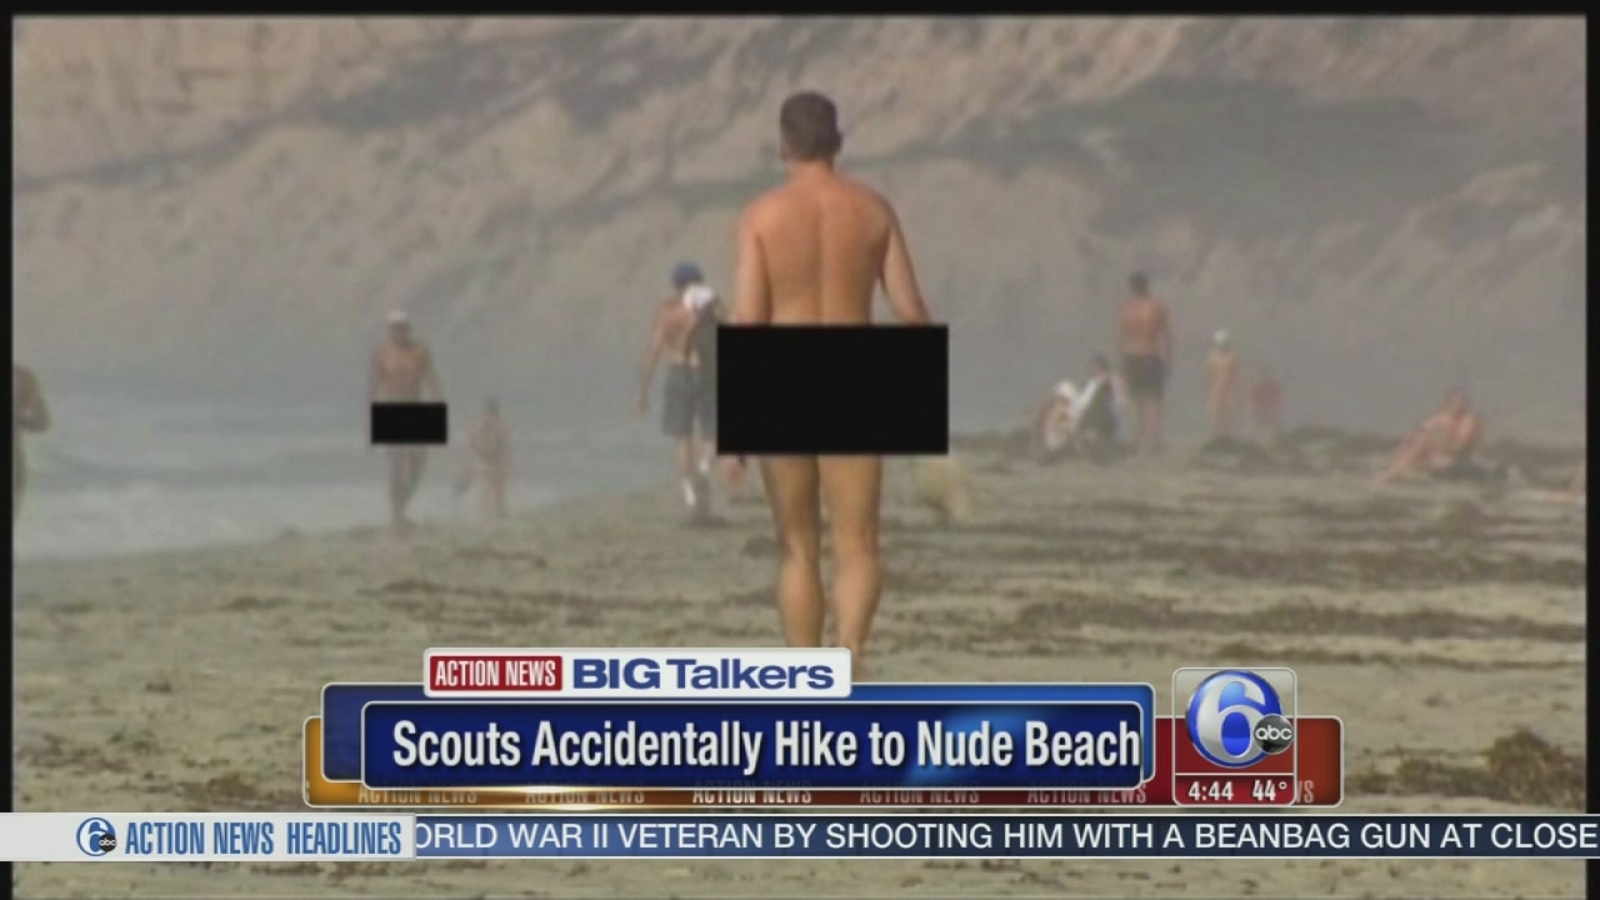 bunlin khim recommends nudist on the beach videos pic